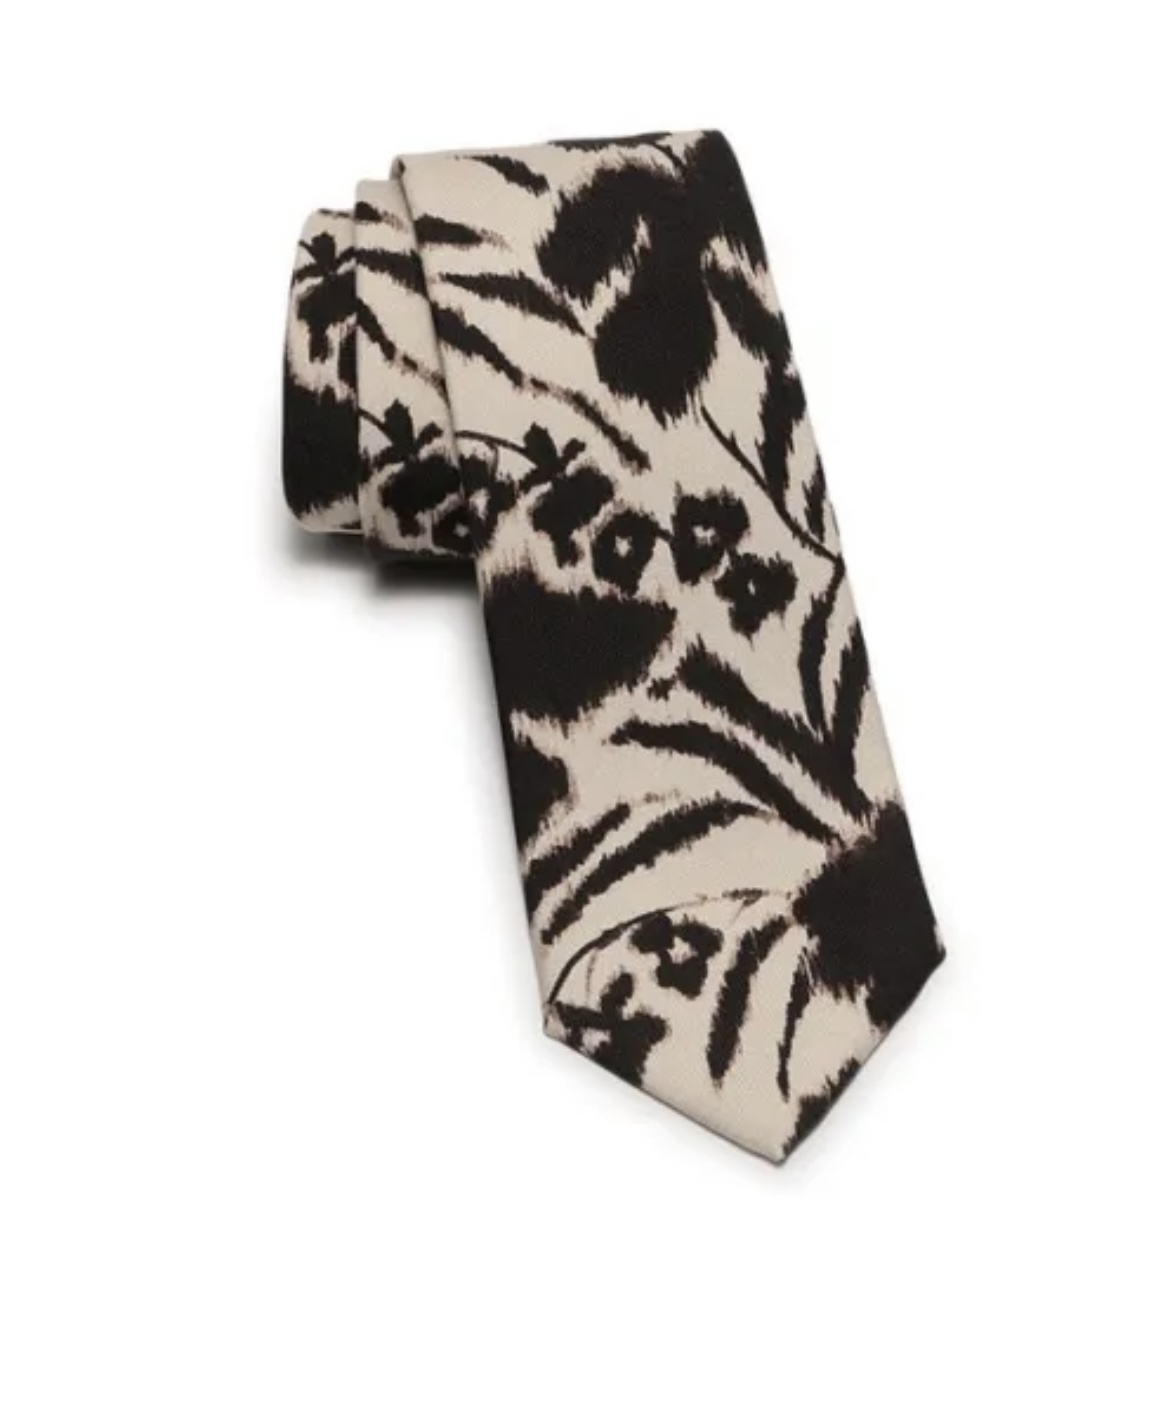 NWT Ferragamo Floral Black and Taupe Tie